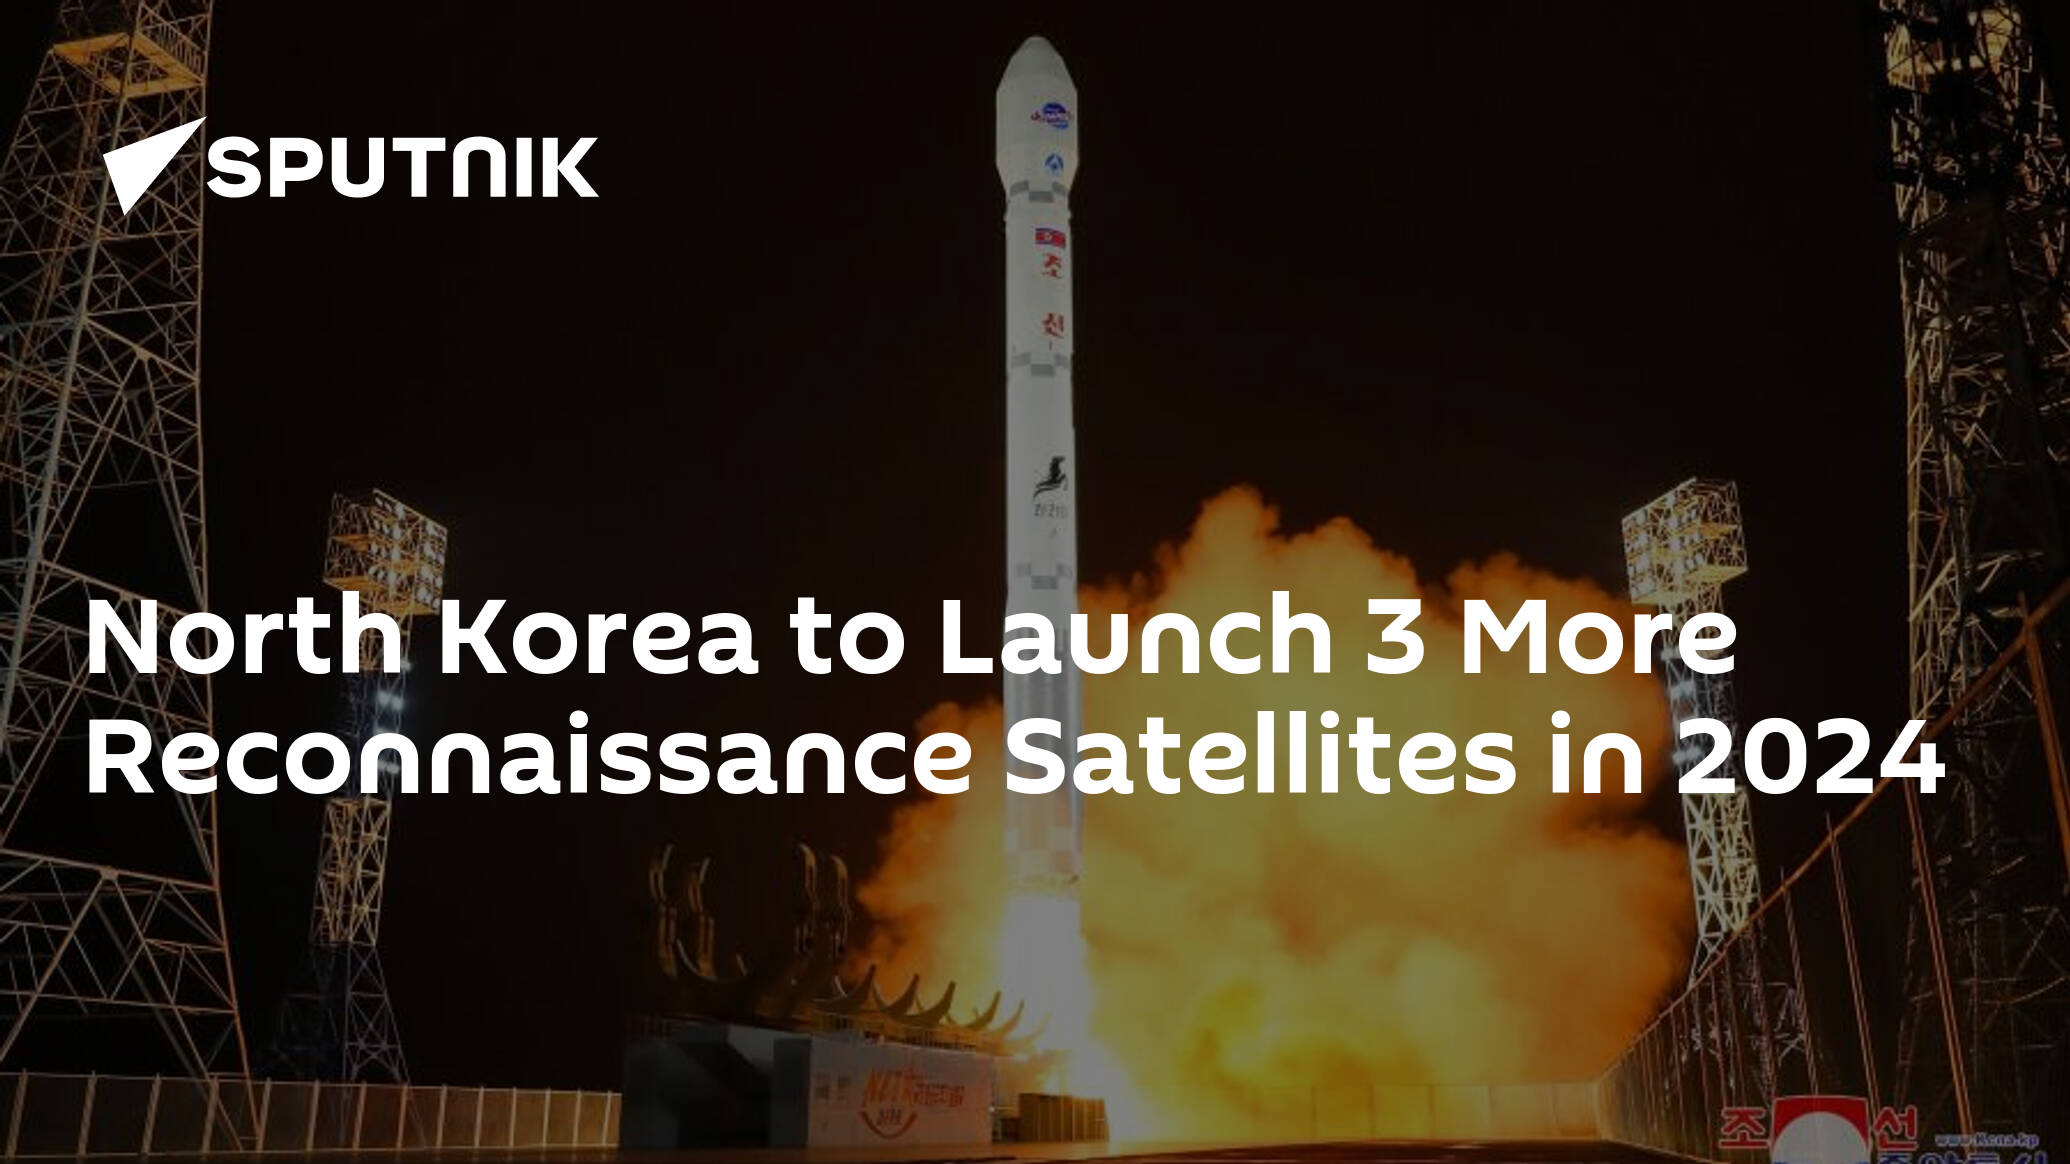 North Korea to Launch 3 More Reconnaissance Satellites in 2024